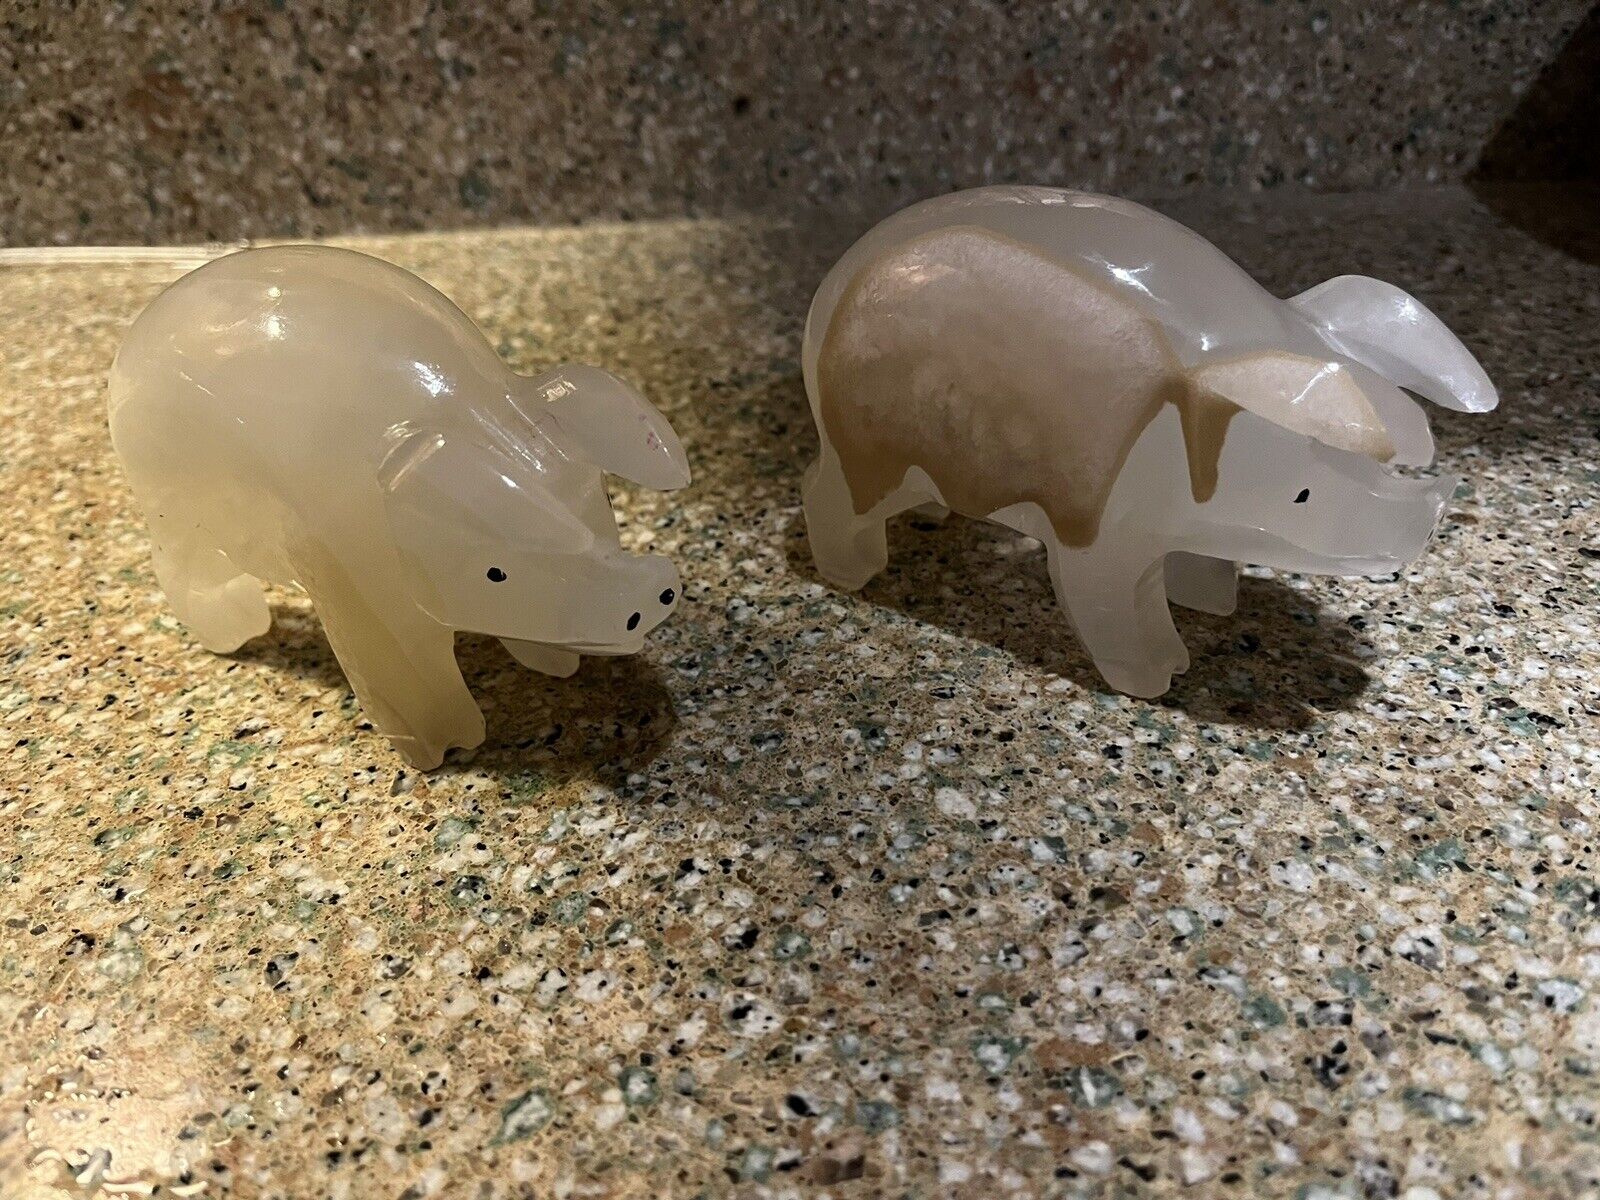 Two Large Crystal Pigs. Carved Stone Animals Made in Mexico. Gemstone Animals .